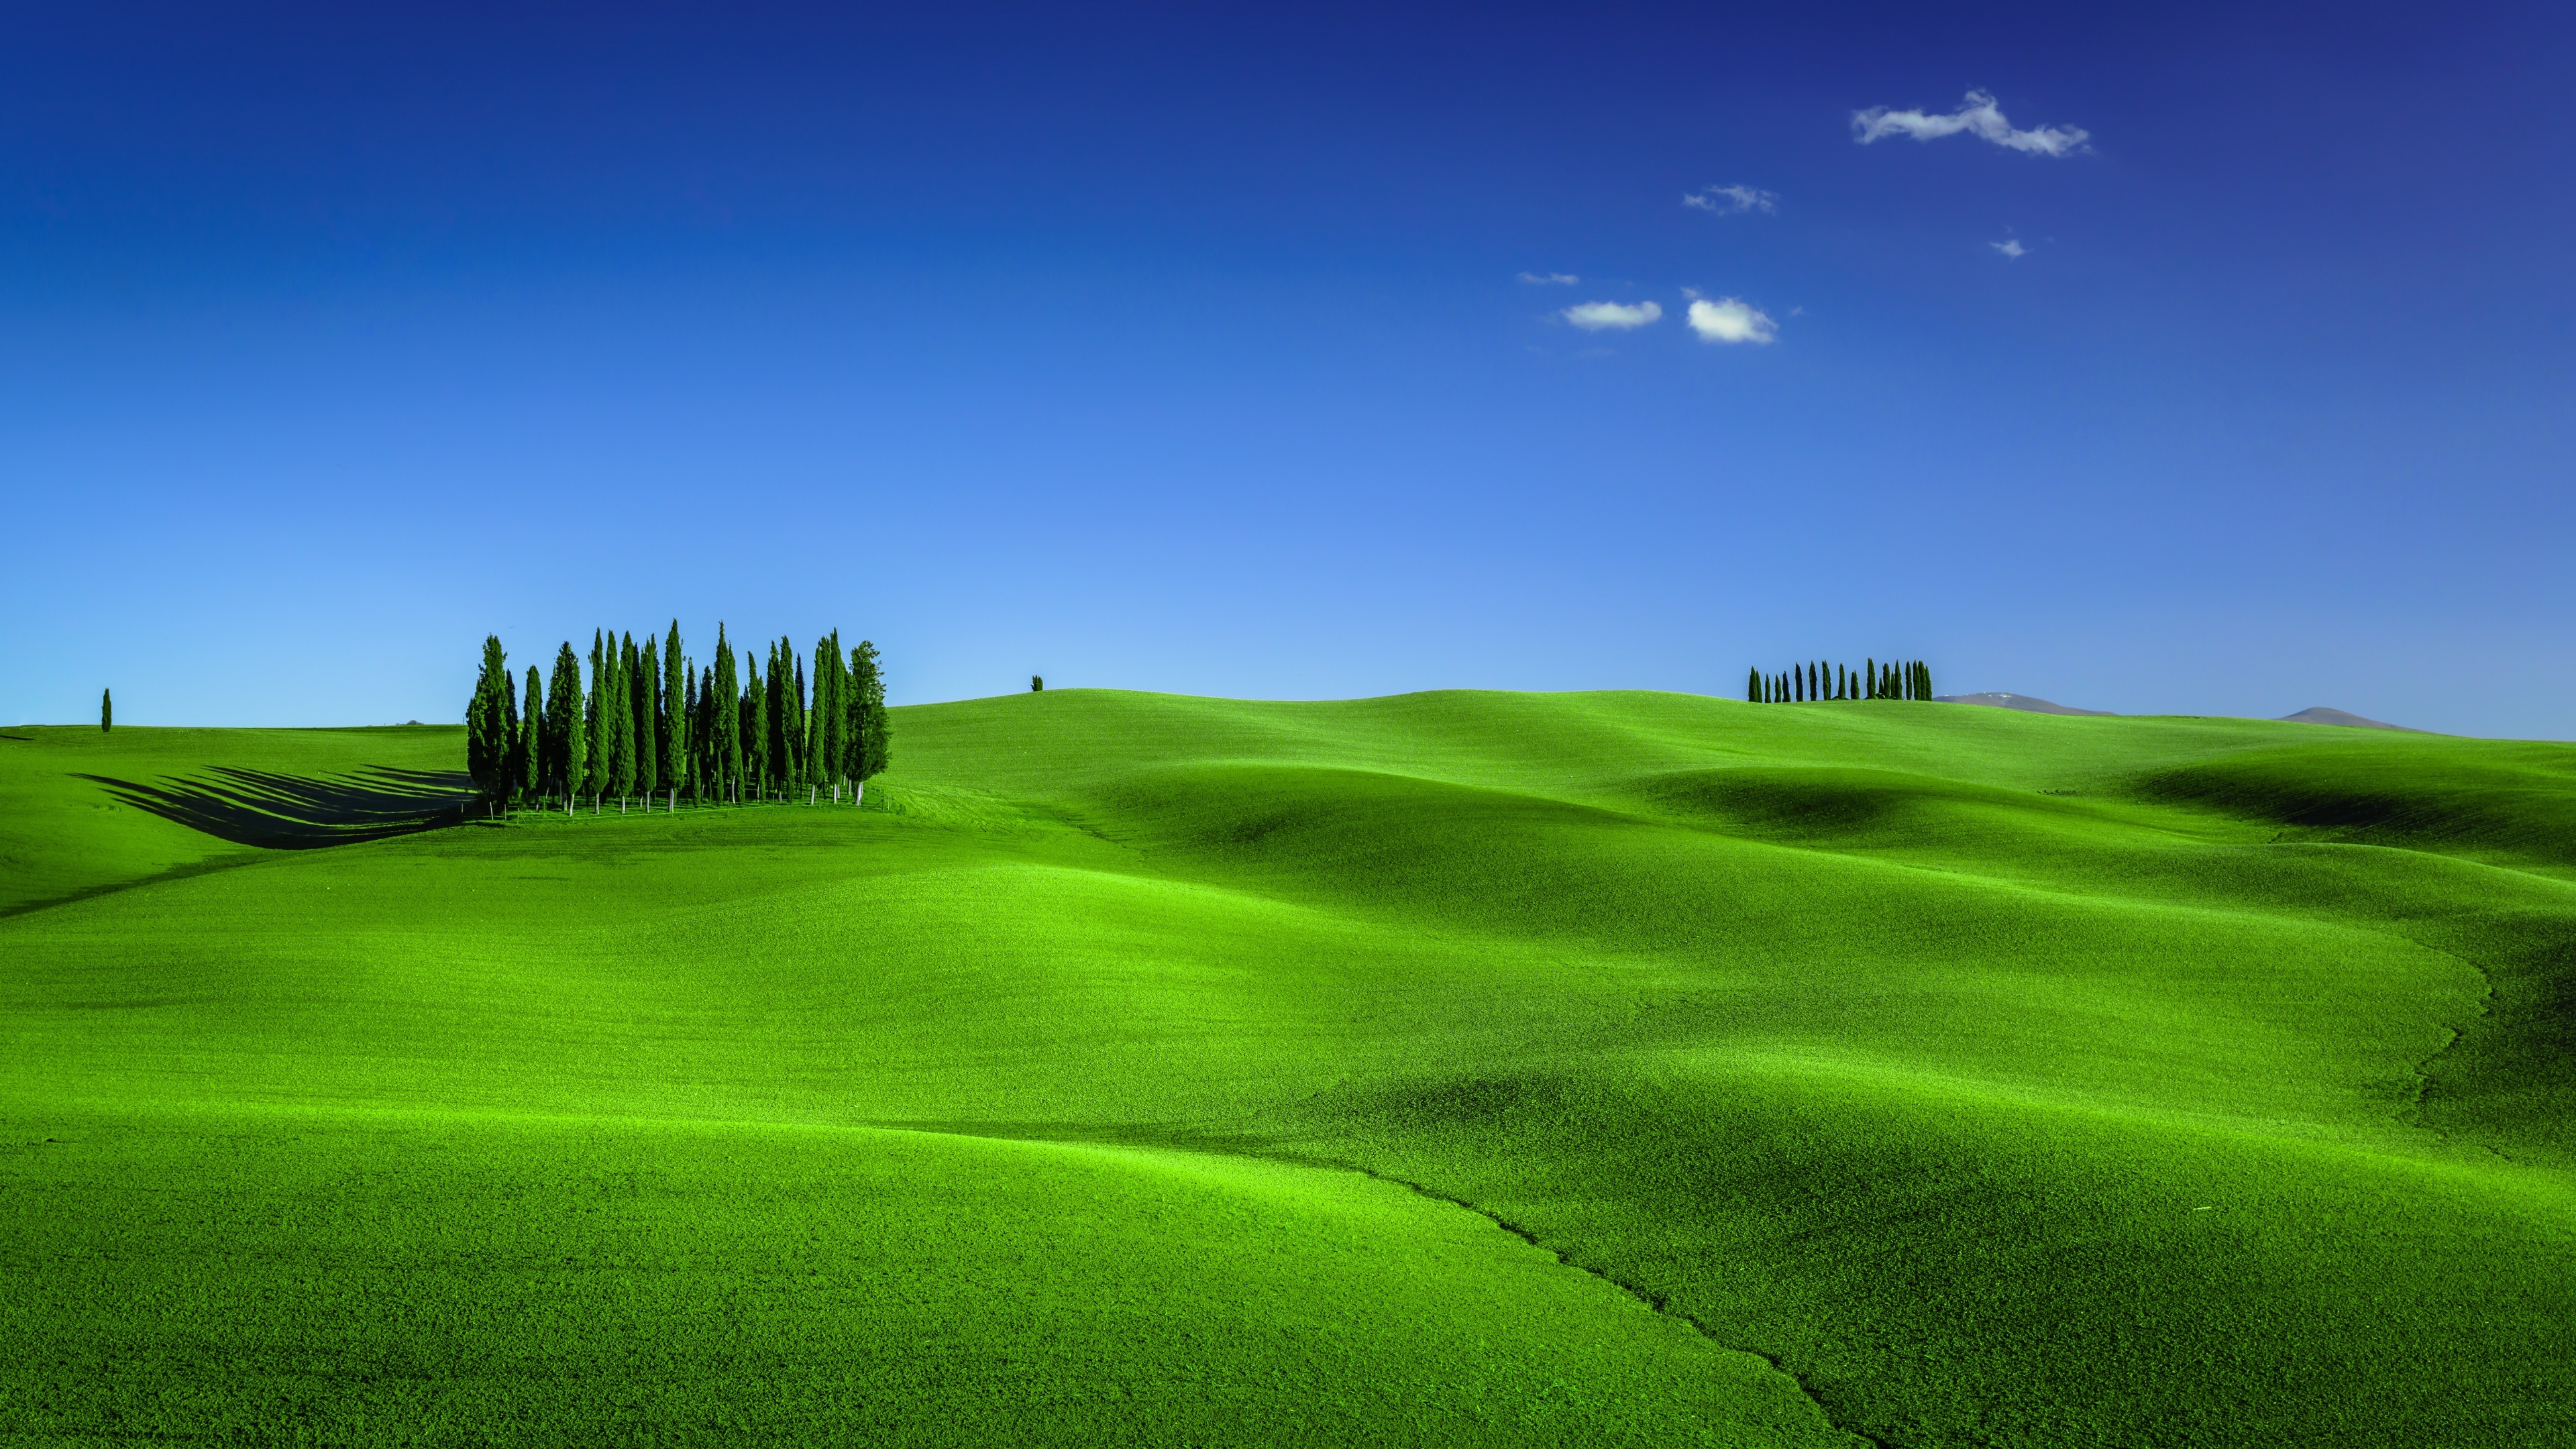 Grass and Sky: Torrenieri, Tuscany, Italy, Clear view, Natural landscape, Trees. 3840x2160 4K Background.